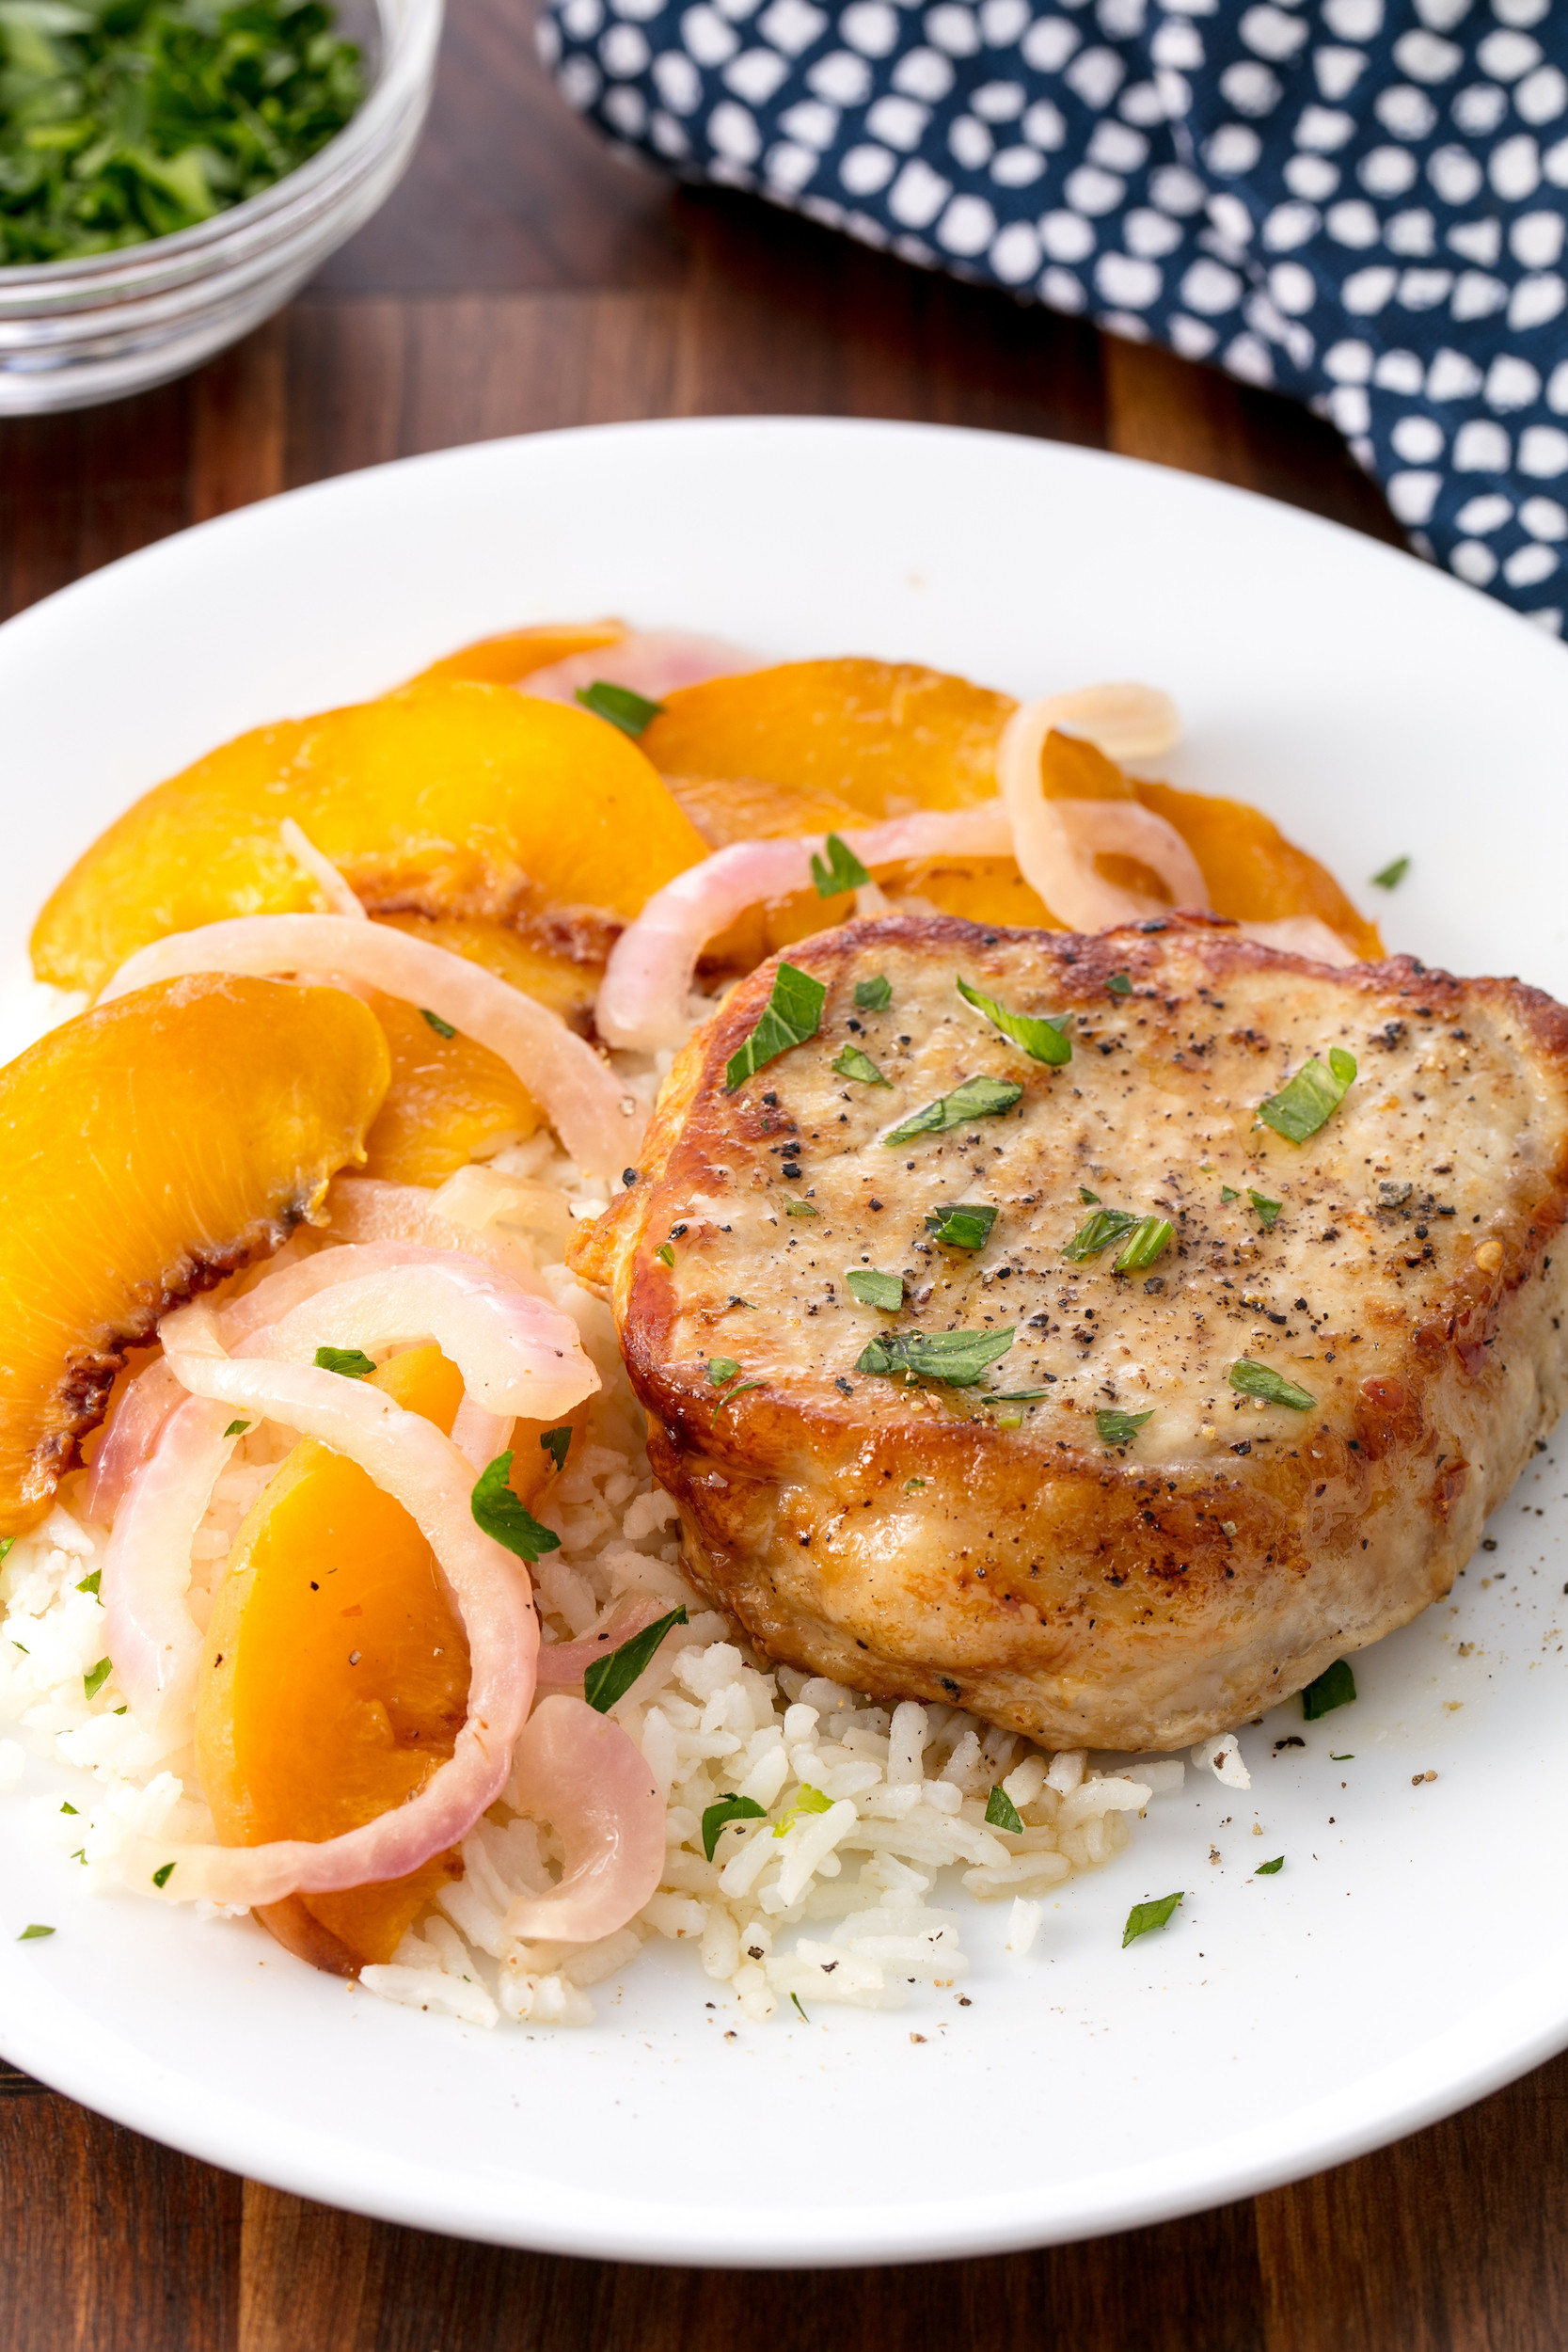 Healthy Way To Cook Pork Chops
 20 Best Pork Chop Recipes How To Cook Pork Chops—Delish